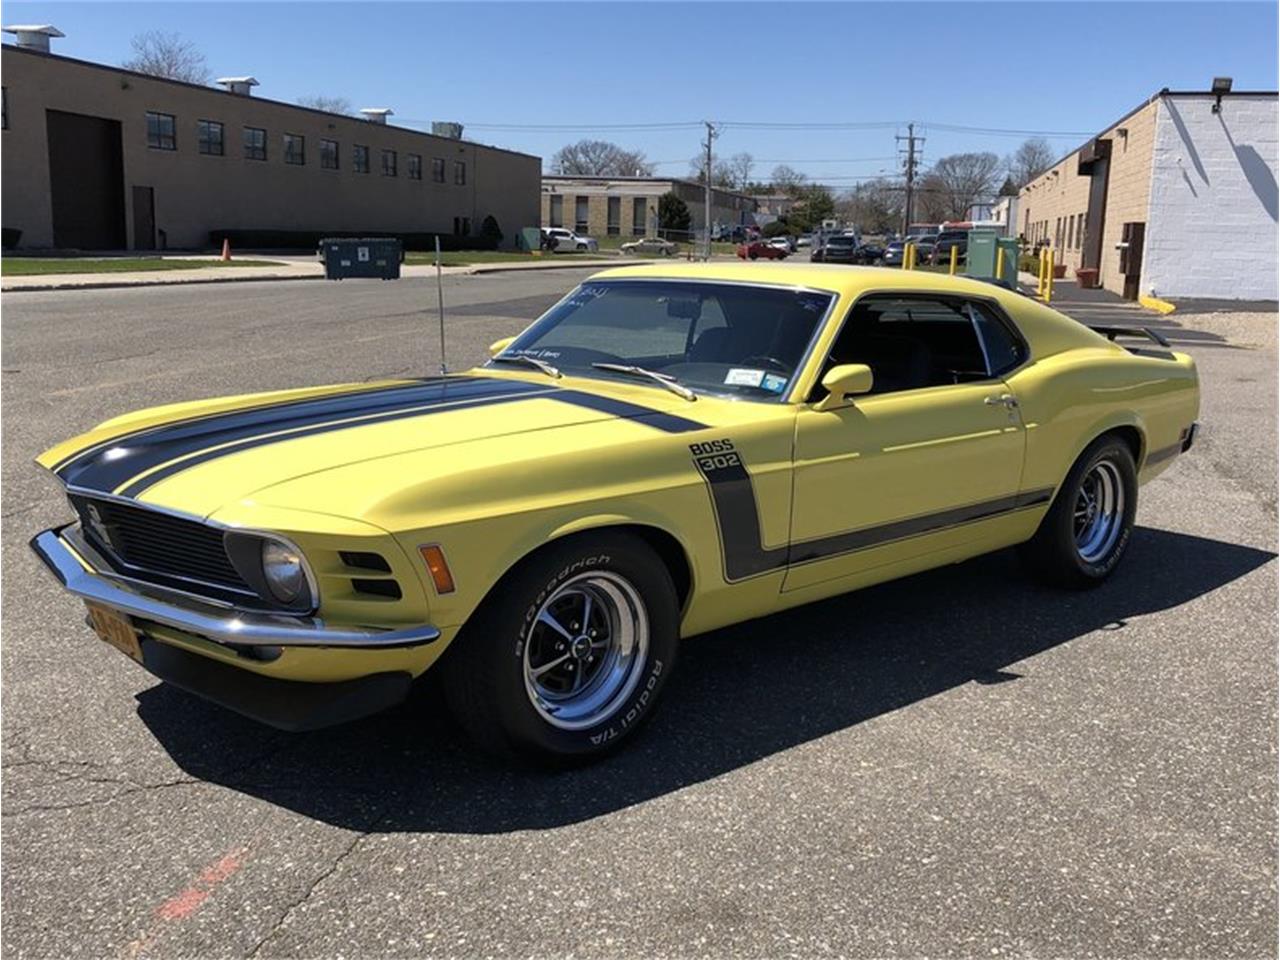 1970 Ford Mustang for Sale | ClassicCars.com | CC-1086321